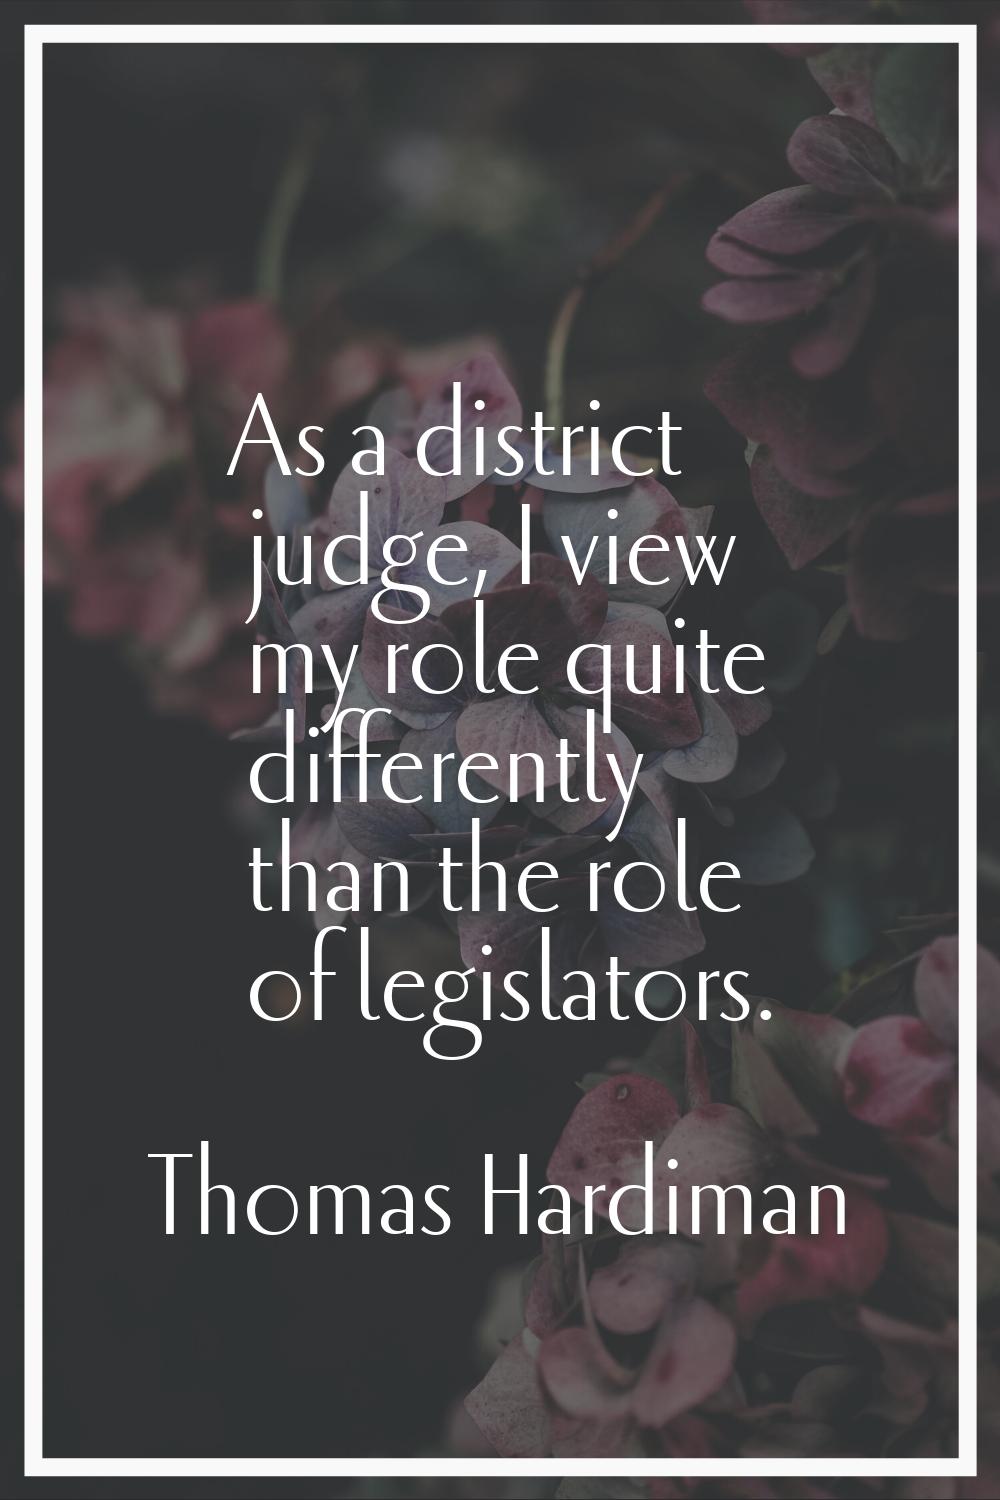 As a district judge, I view my role quite differently than the role of legislators.